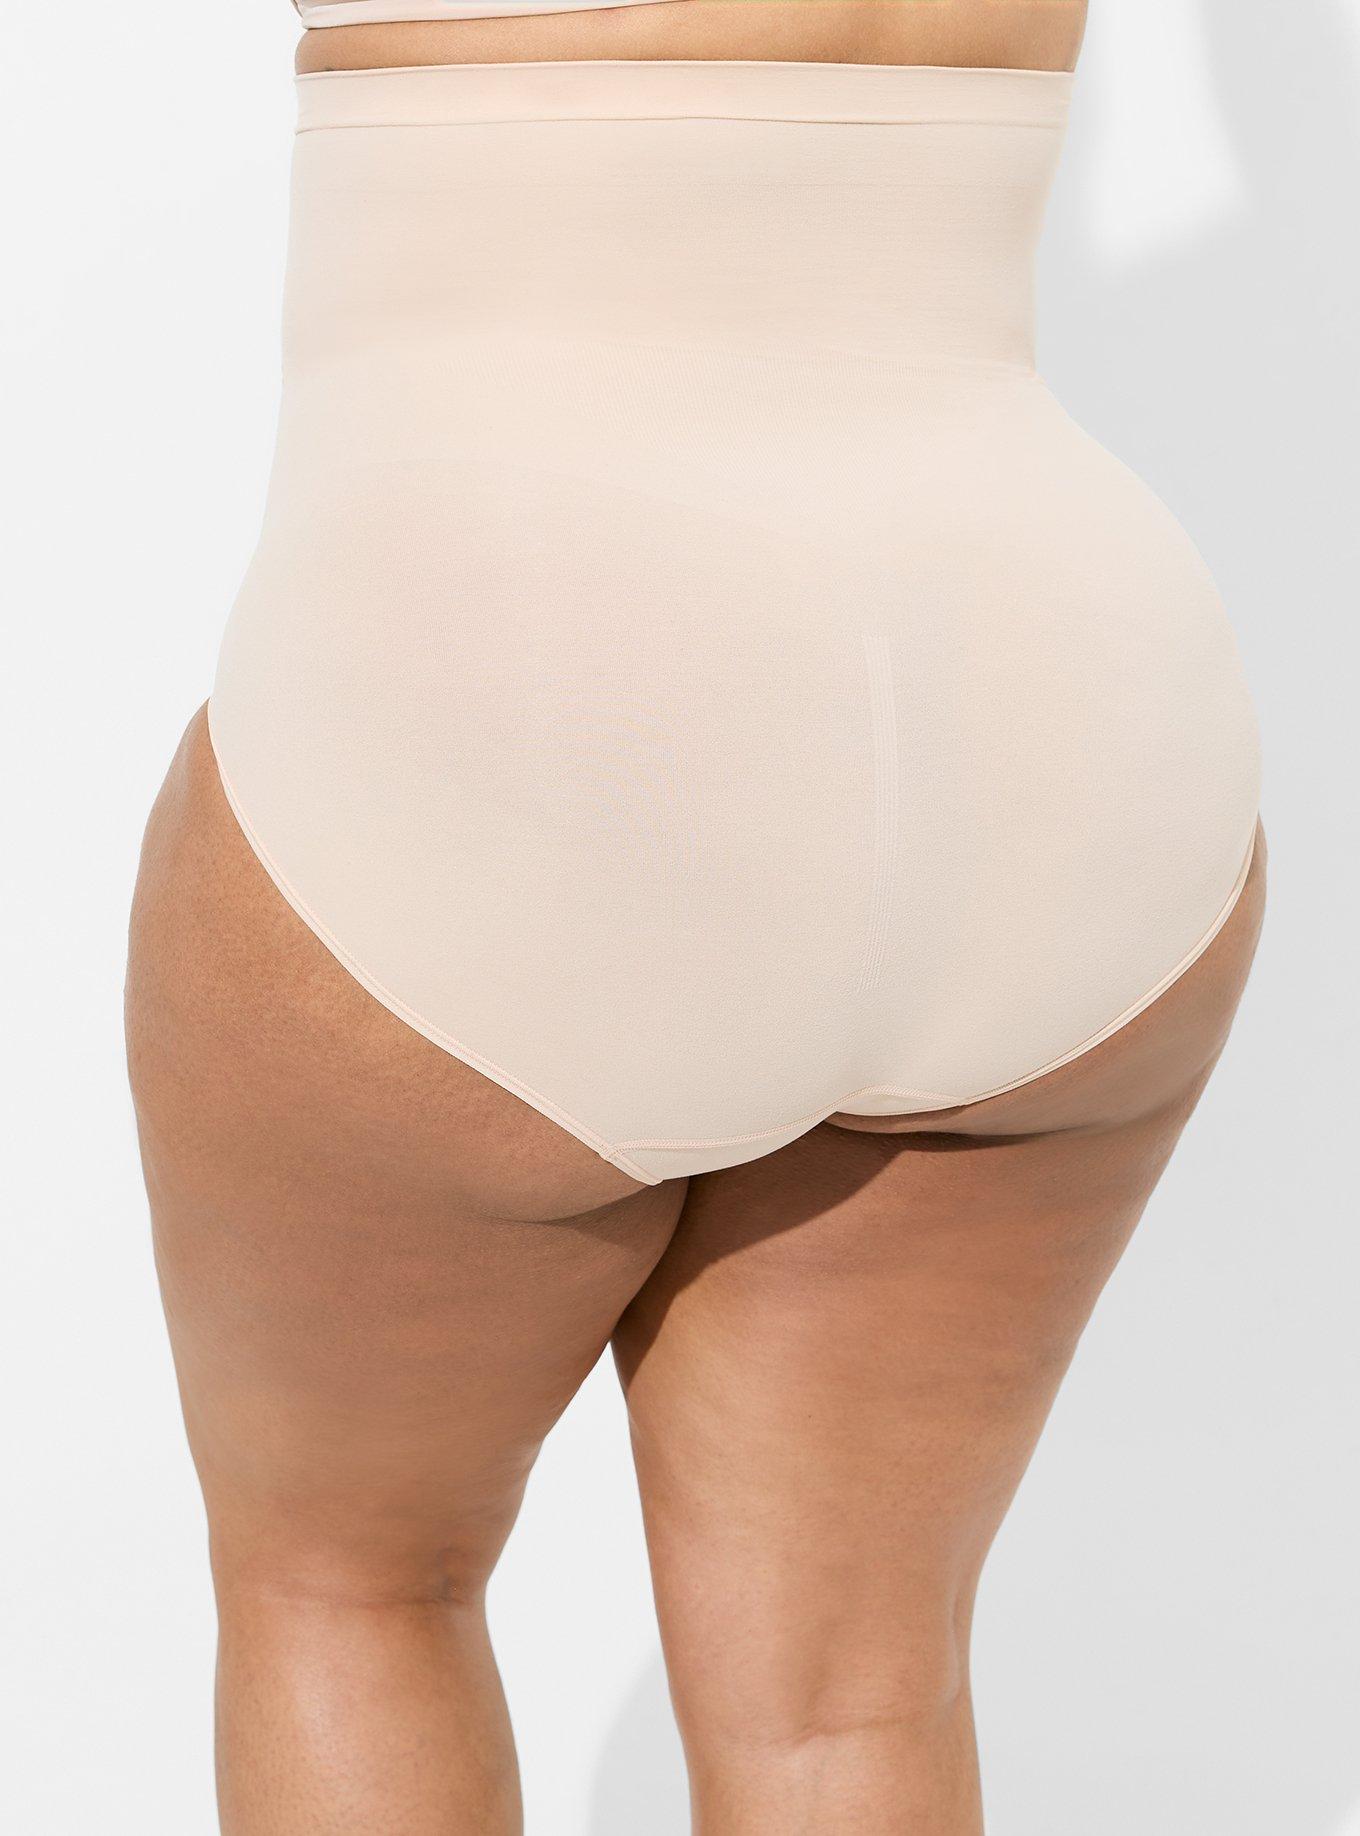 Spanx Higher Power High Waisted Power Panties - With REAL Photos! 